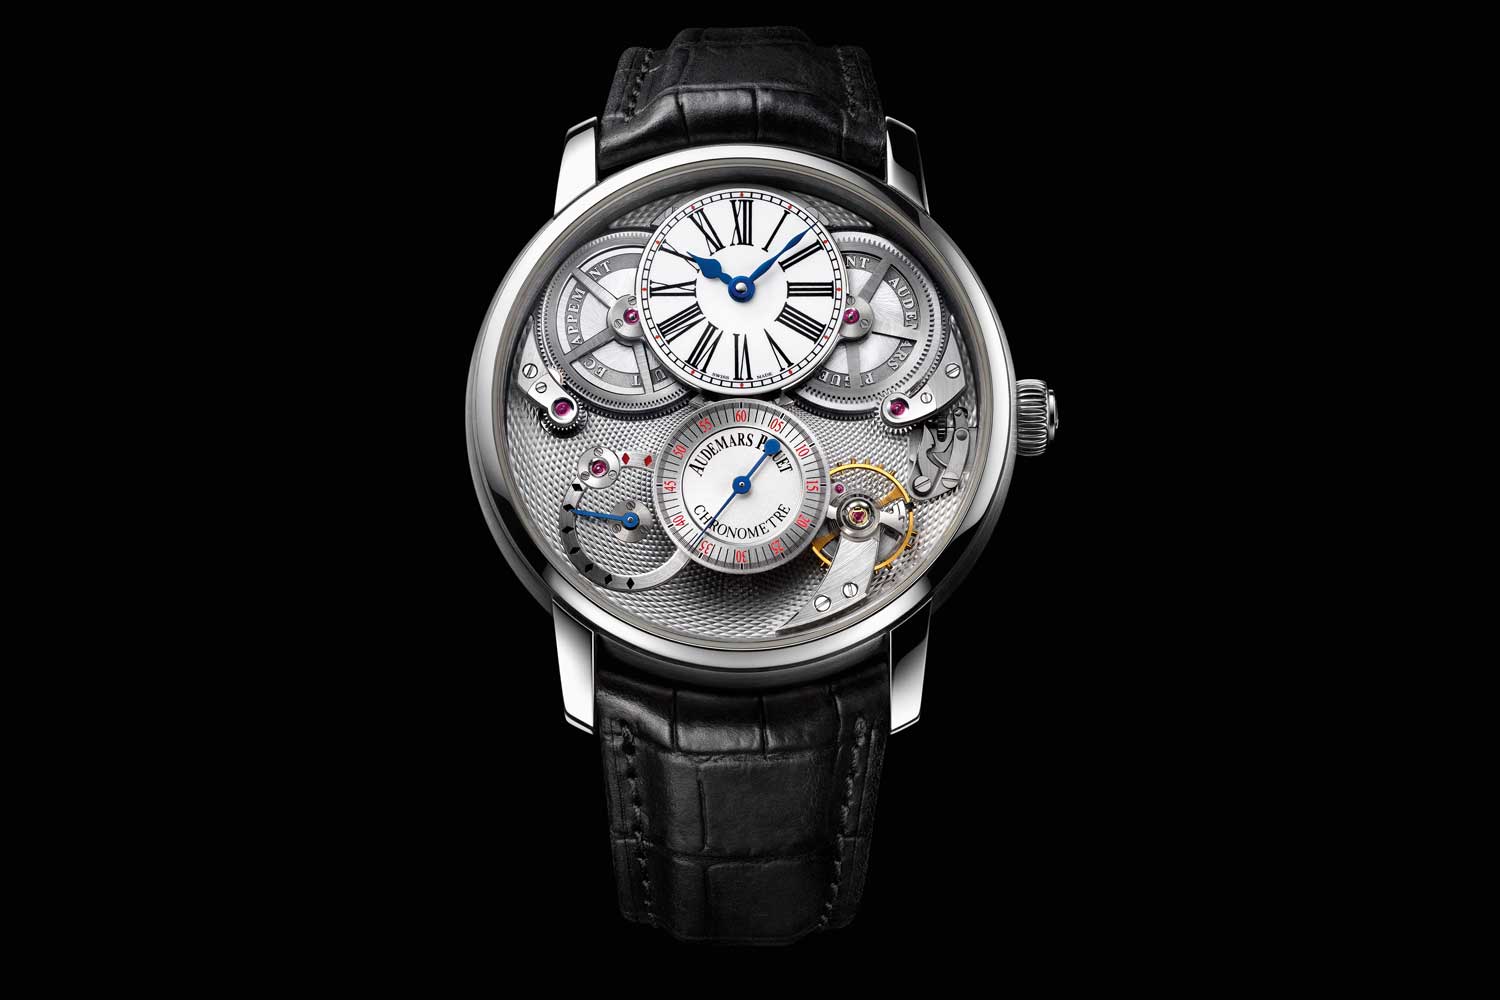 The 2009 Jules Audemars Chronometer offers a rare package of a high frequency of 6Hz and a long power reserve of 90 hours